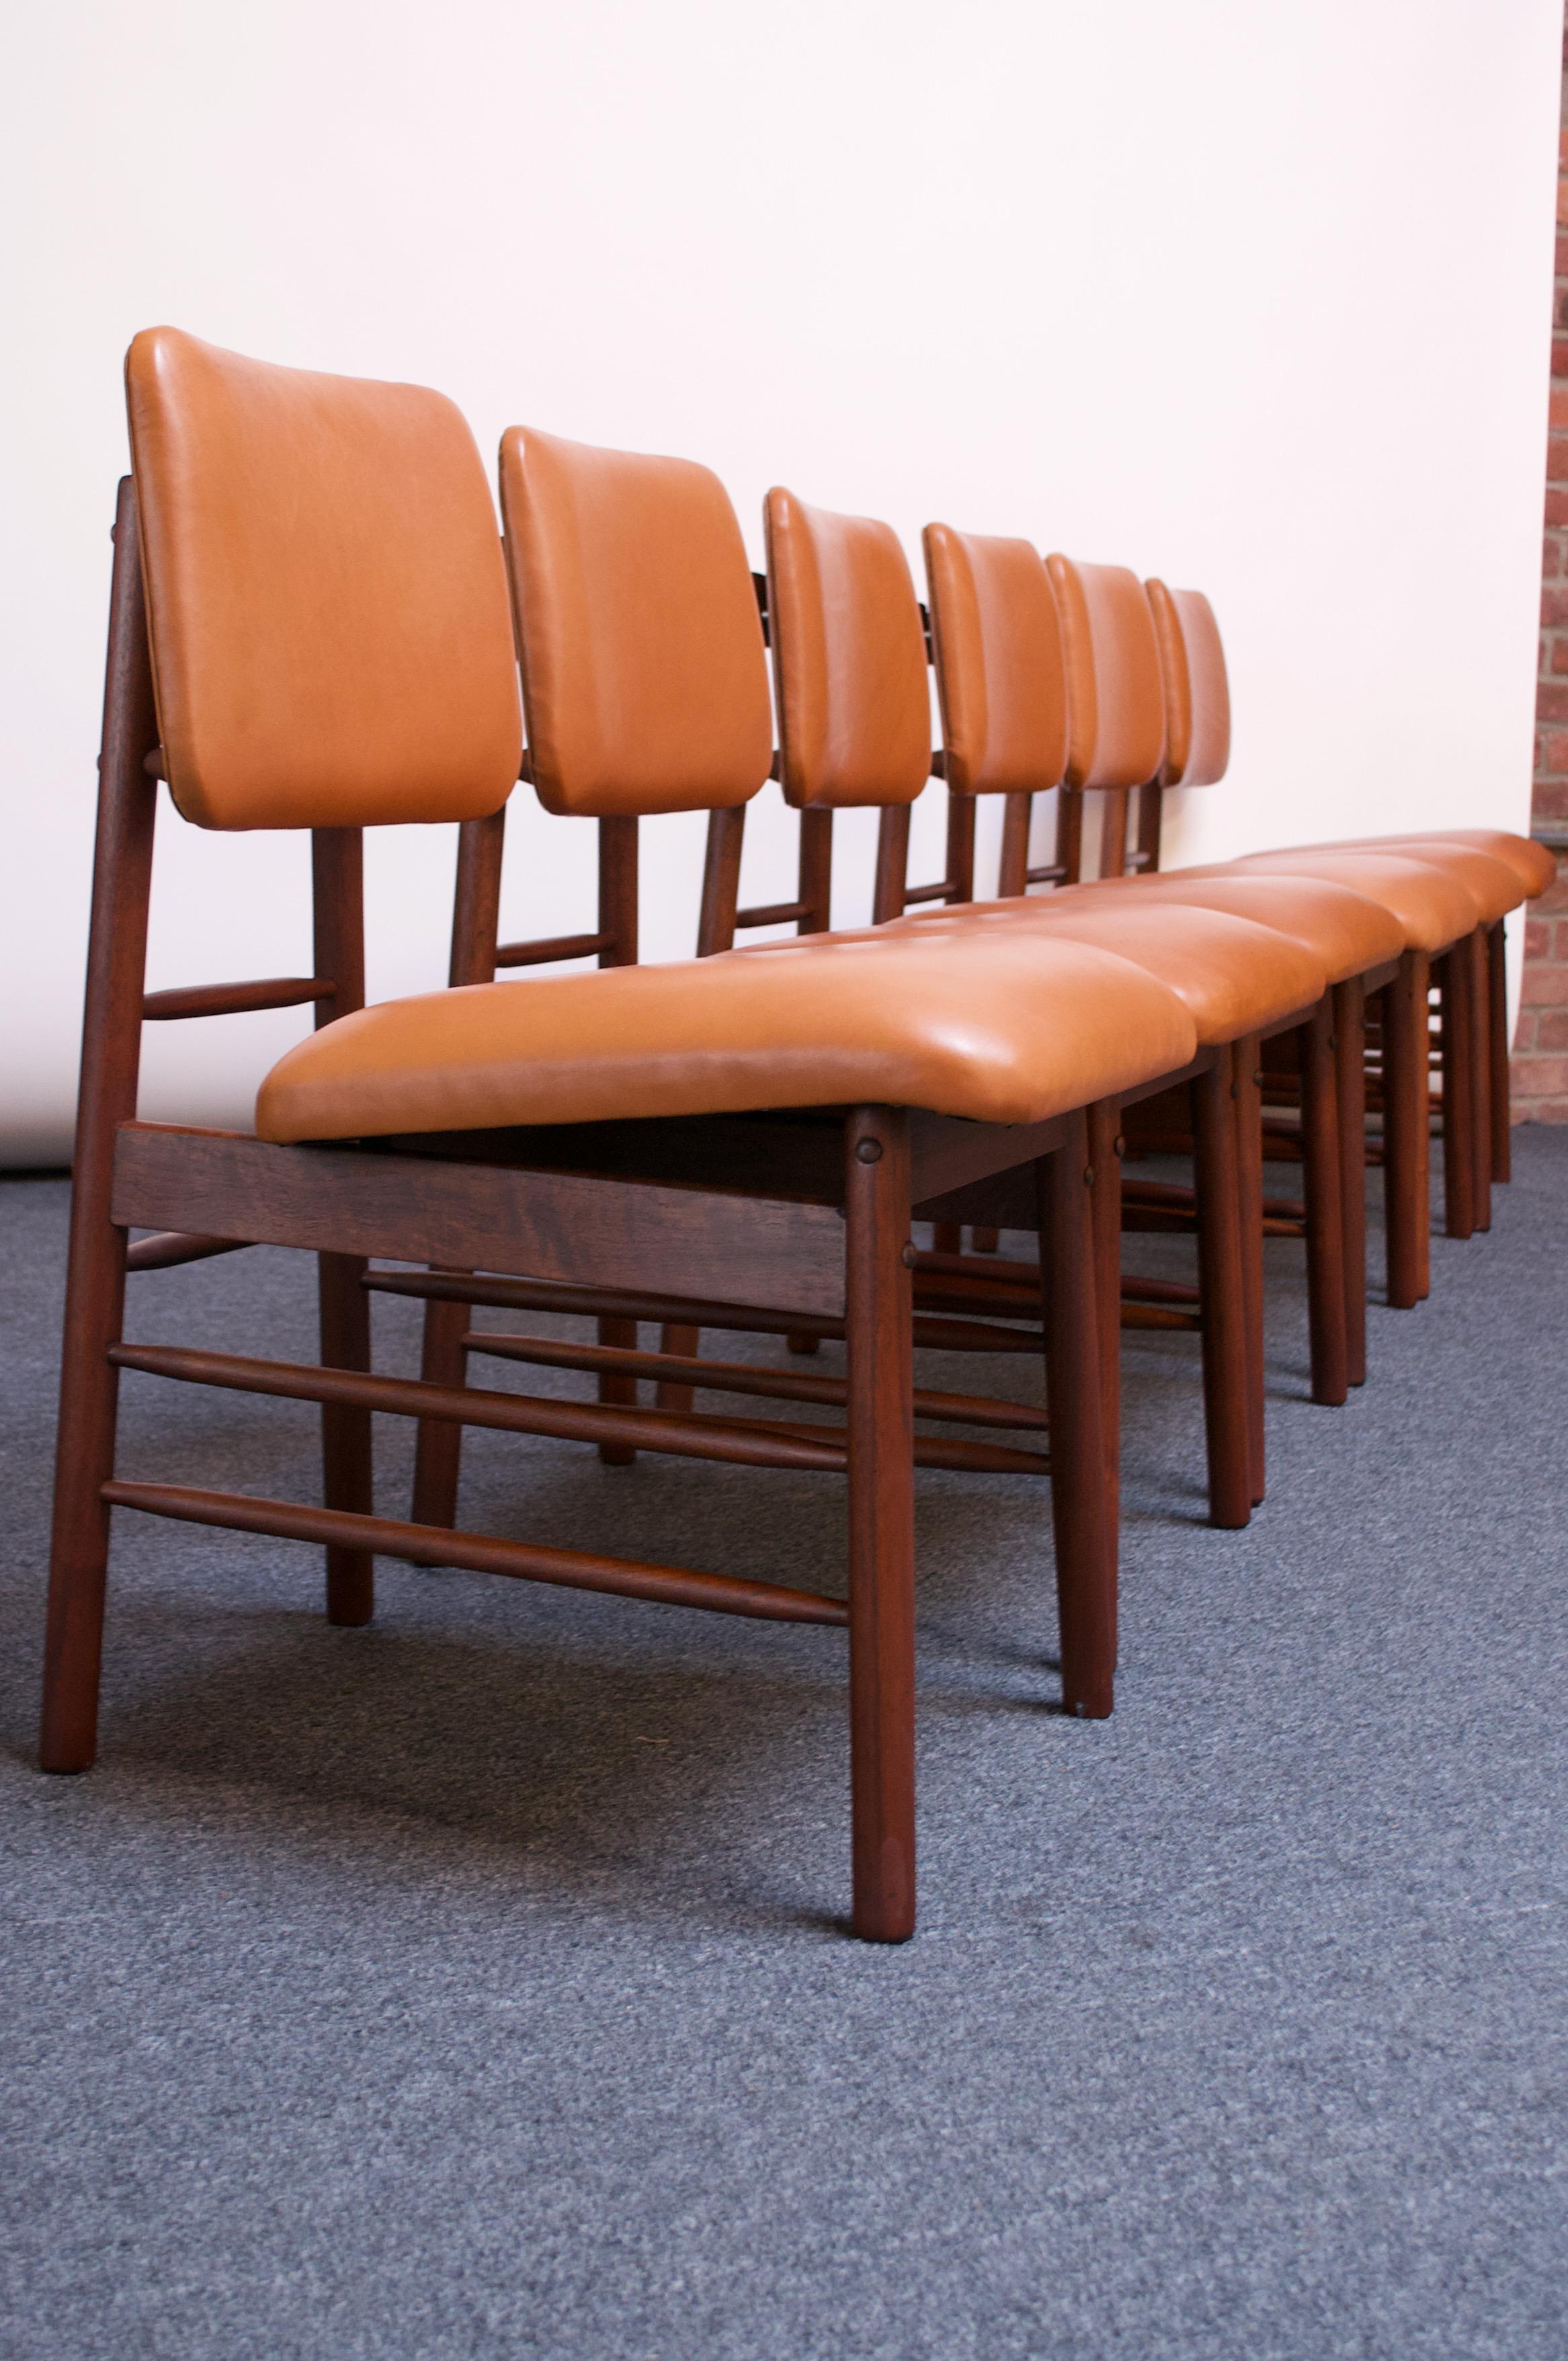 Mid-20th Century Set of Six Walnut and Leather Dining Chairs by Greta Grossman